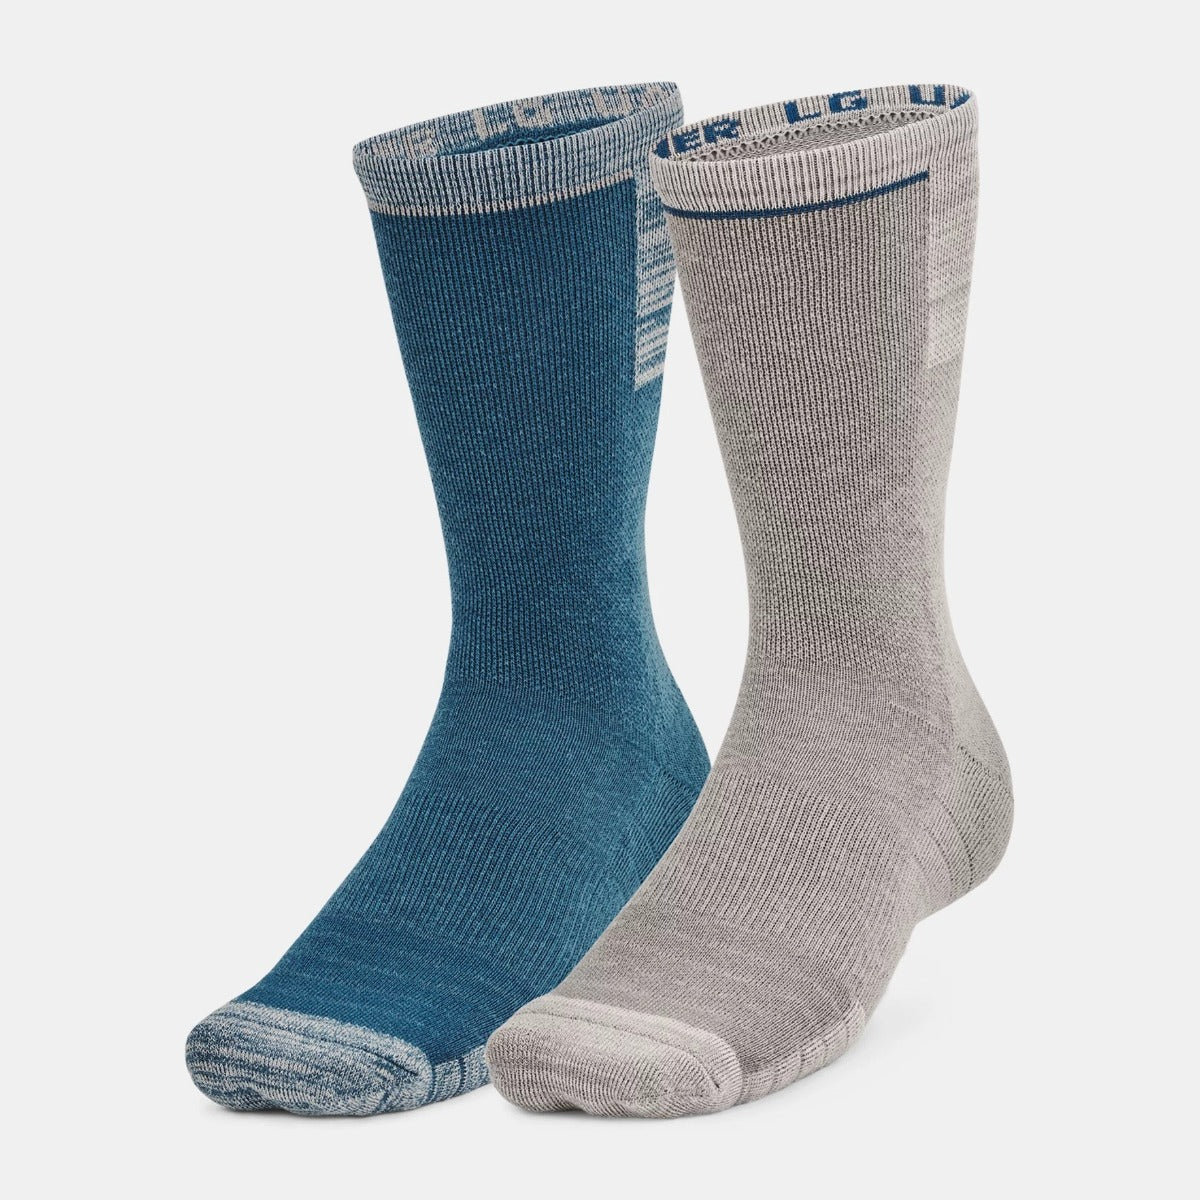 Under Armour Cold Weather Crew Socks 2 Pack Unisex (Blue 294)